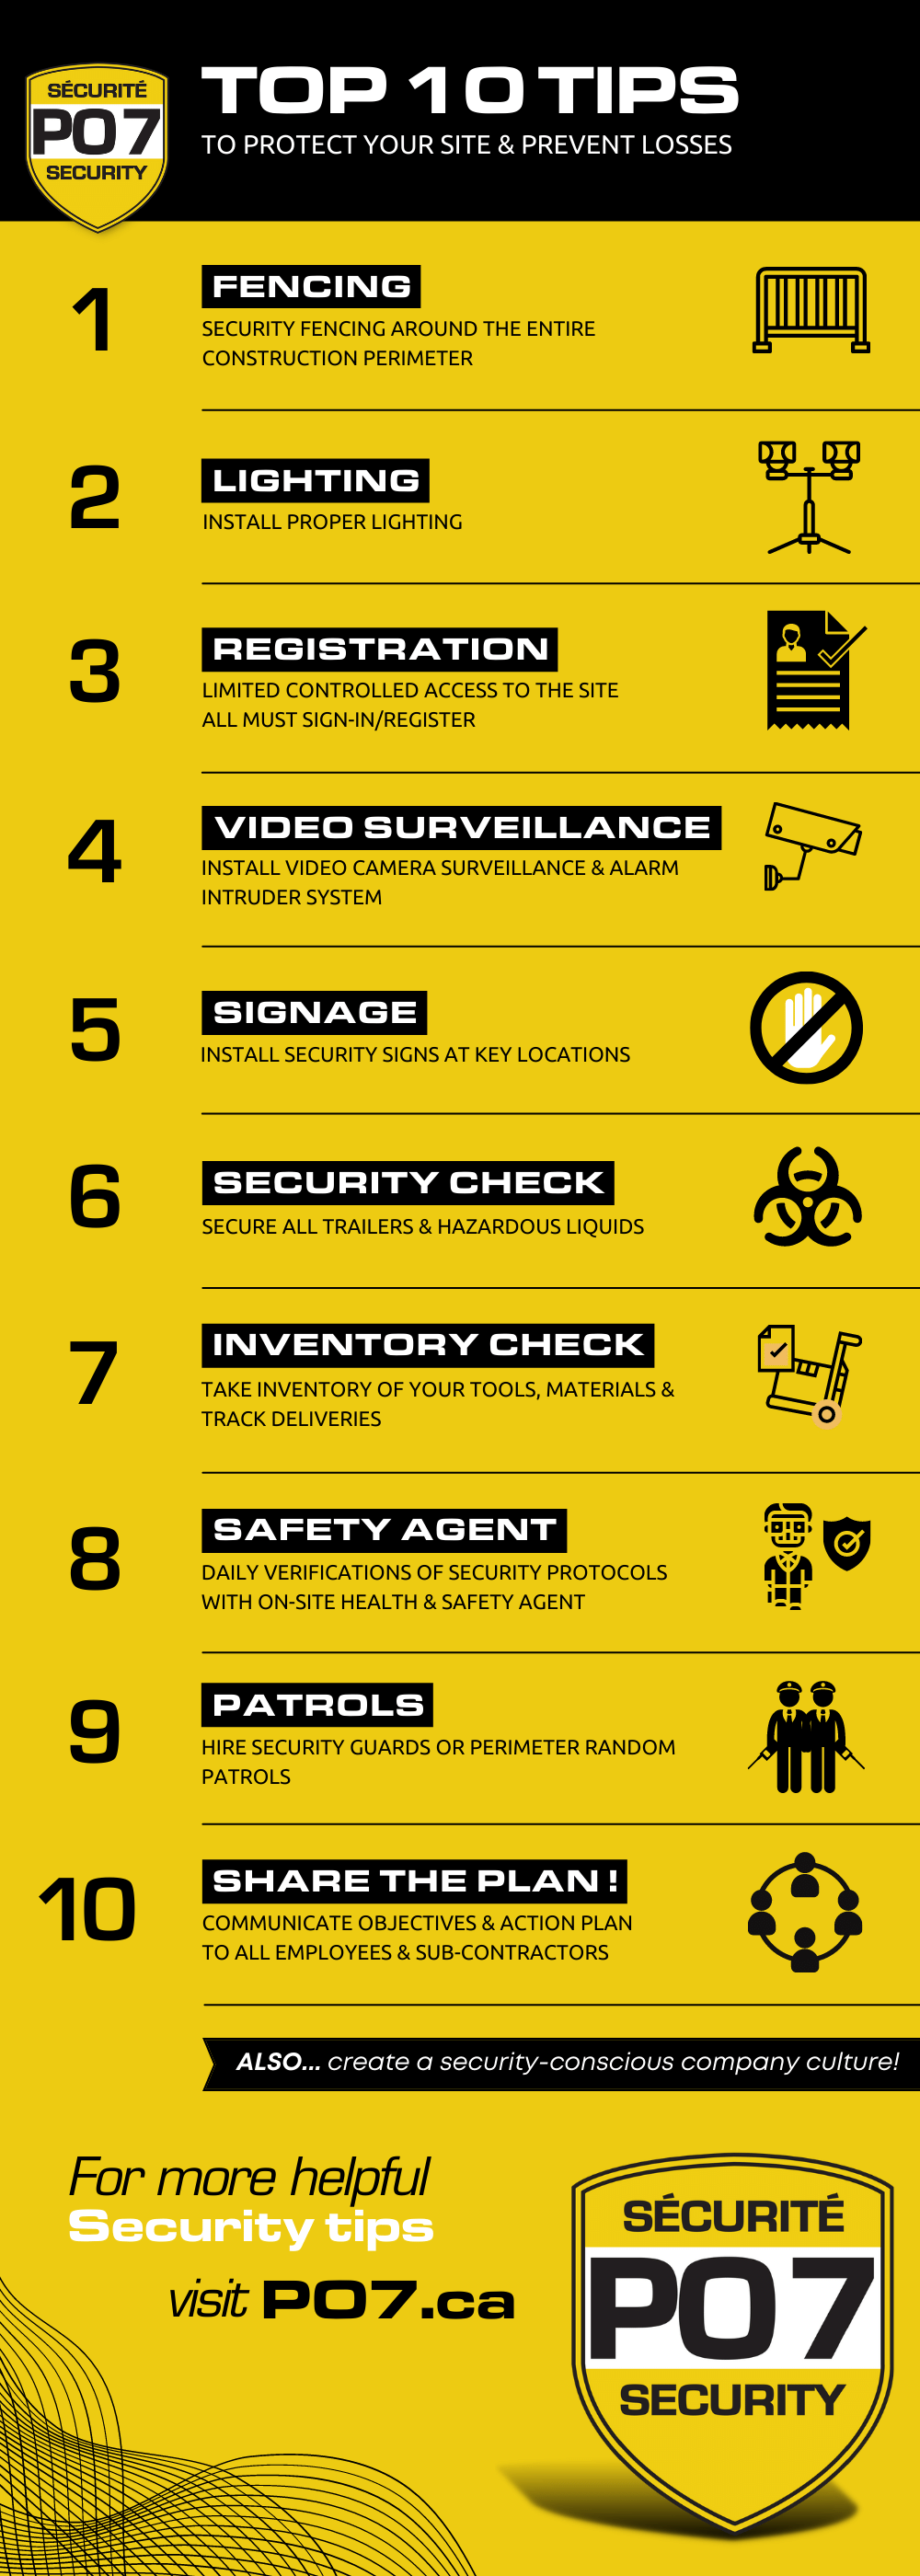 TOP 10 Ways to Protect Your Site and Prevent Losses PO7 Security